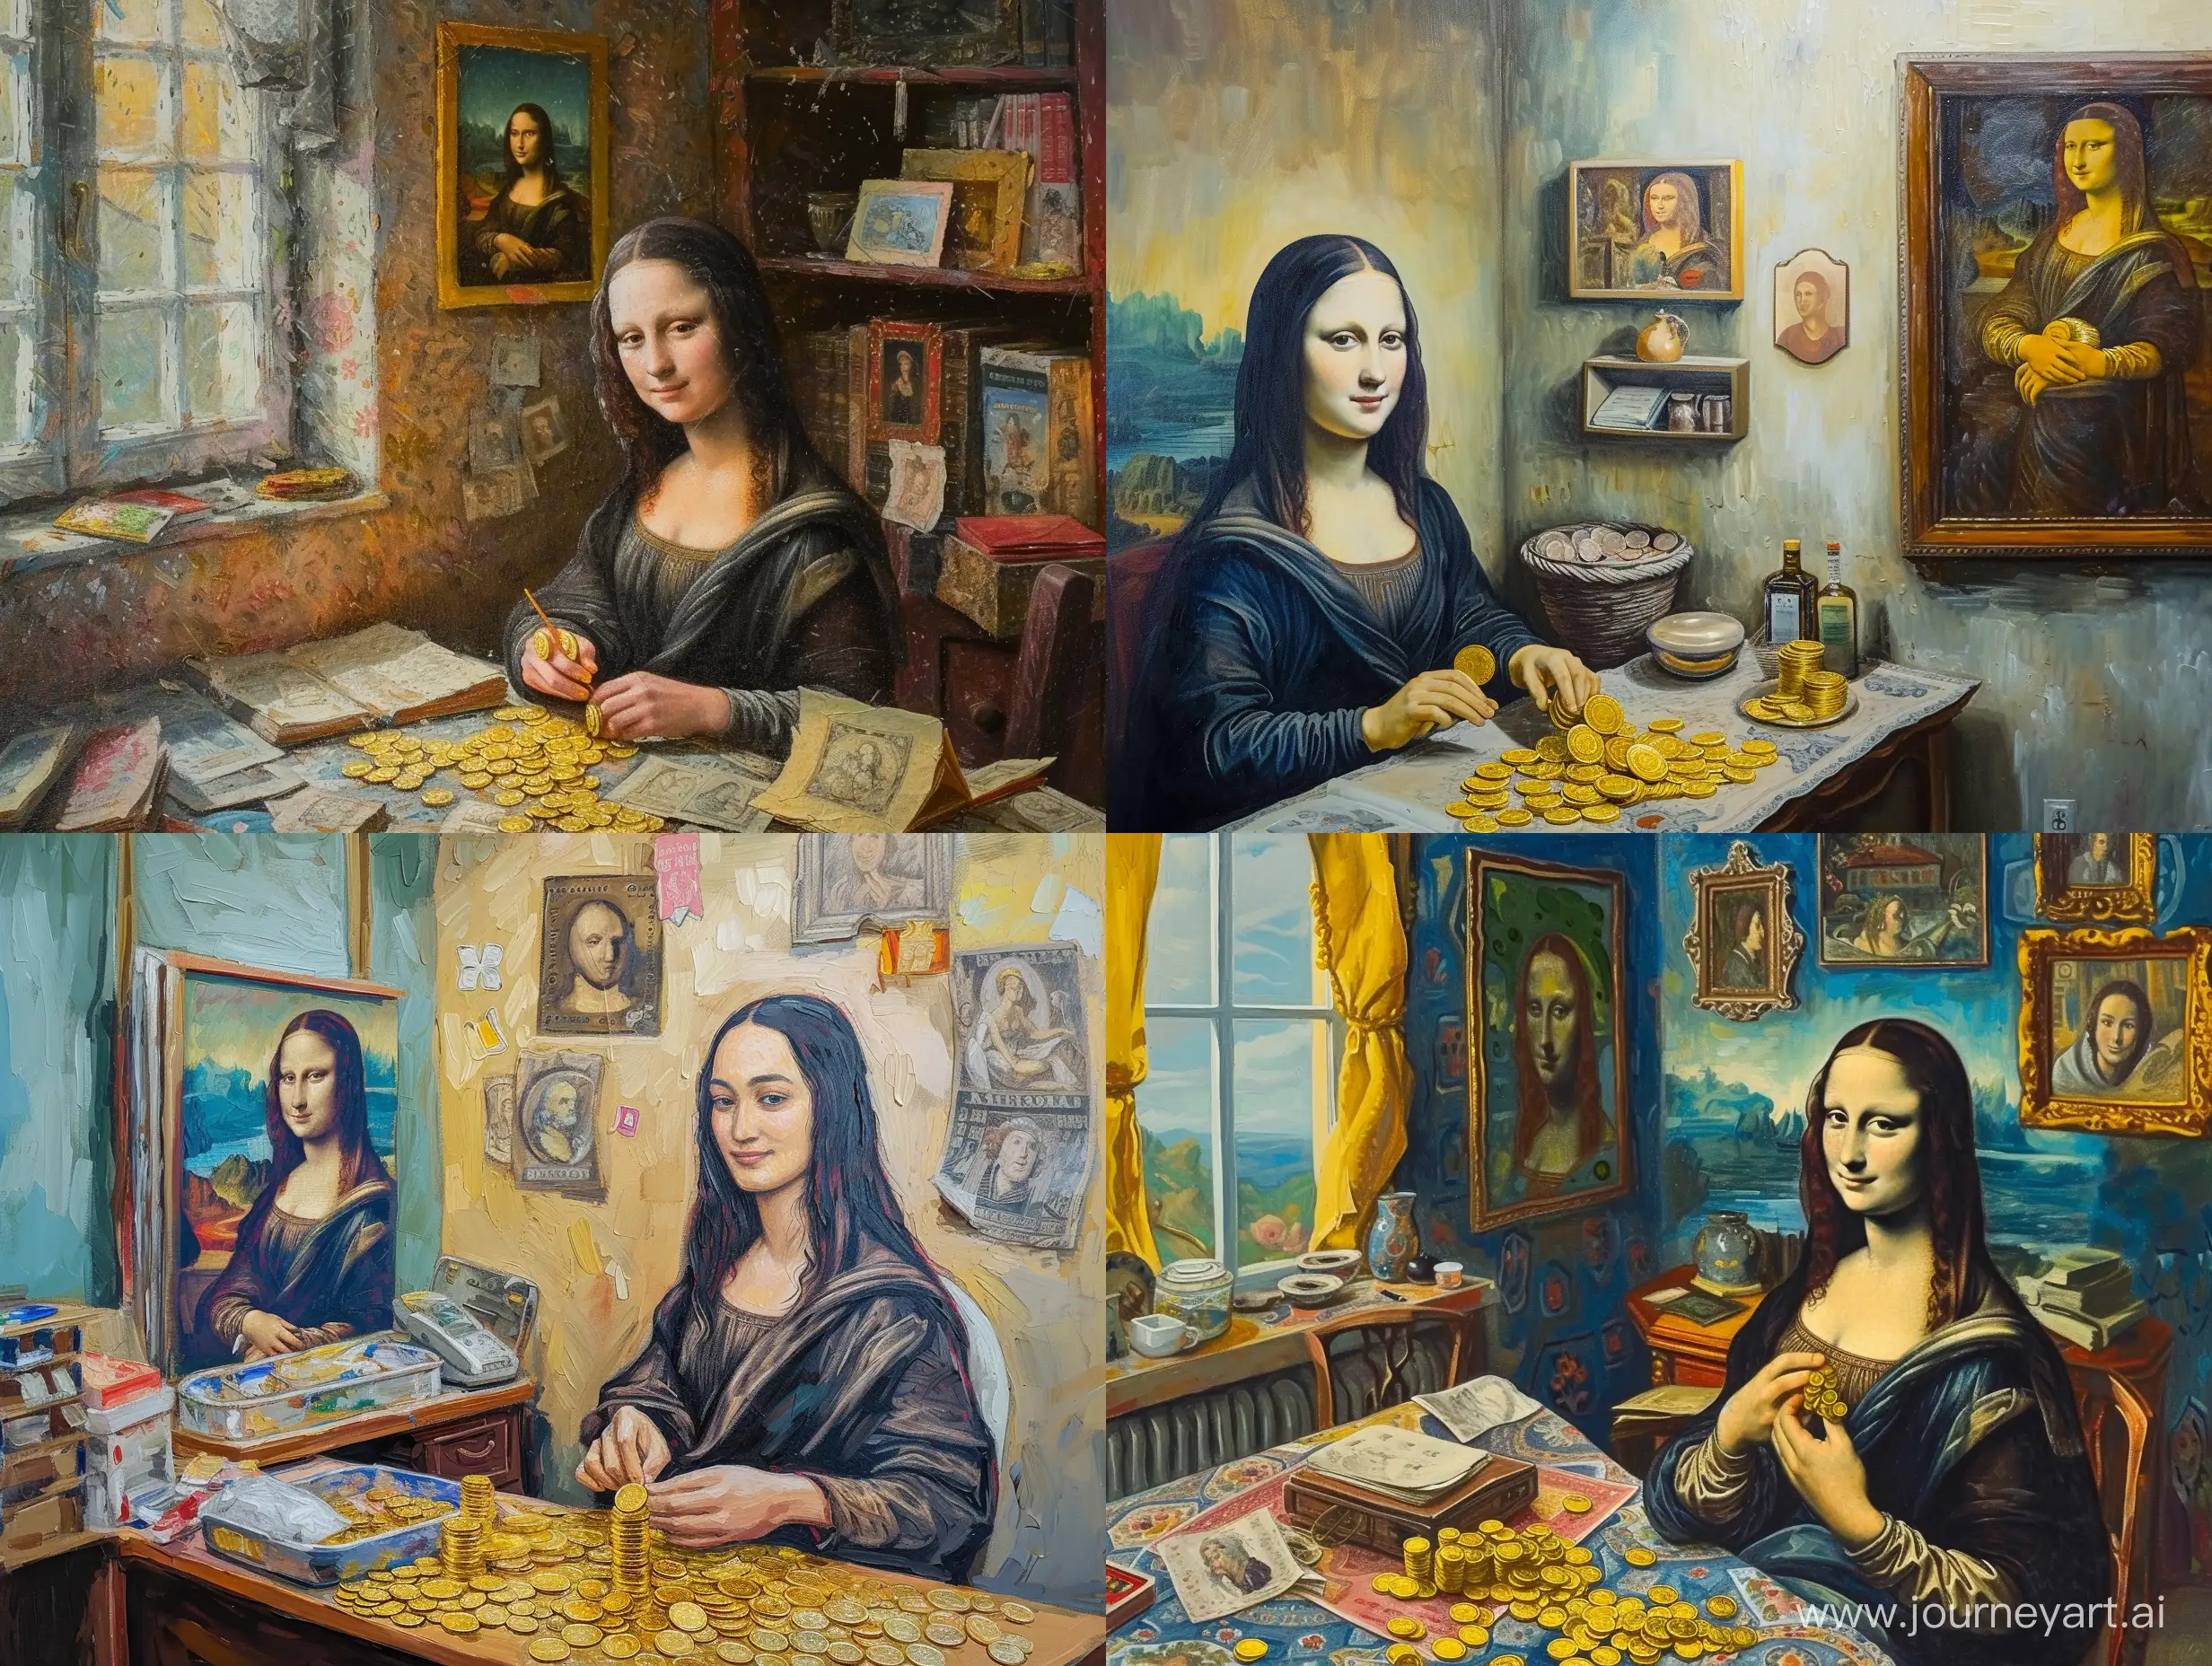 Oil painting of Mona Lisa counting gold coins in her room with her painting on the wall